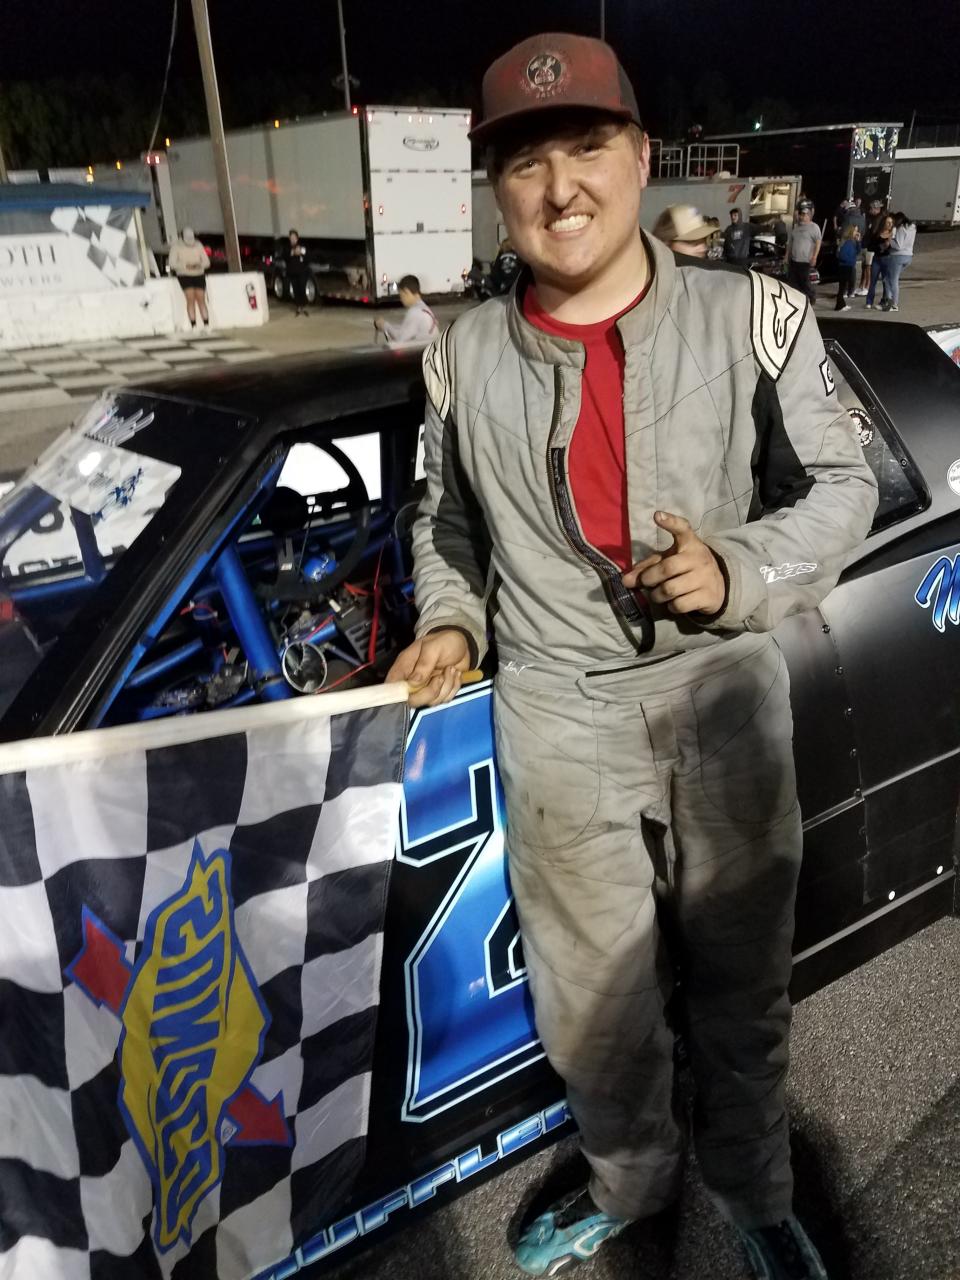 Brothers Daryl McDonald III and Parker McDonald (pictured) are among the Sportsmen division points leaders this season at Five Flags Speedway.